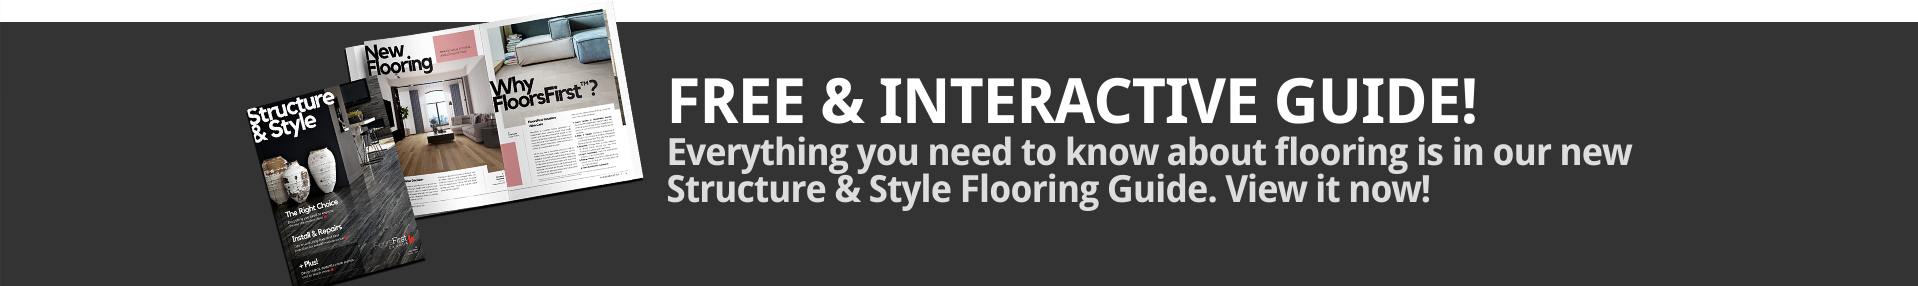 Free and interactive flooring guide from Abba Floorcoverings